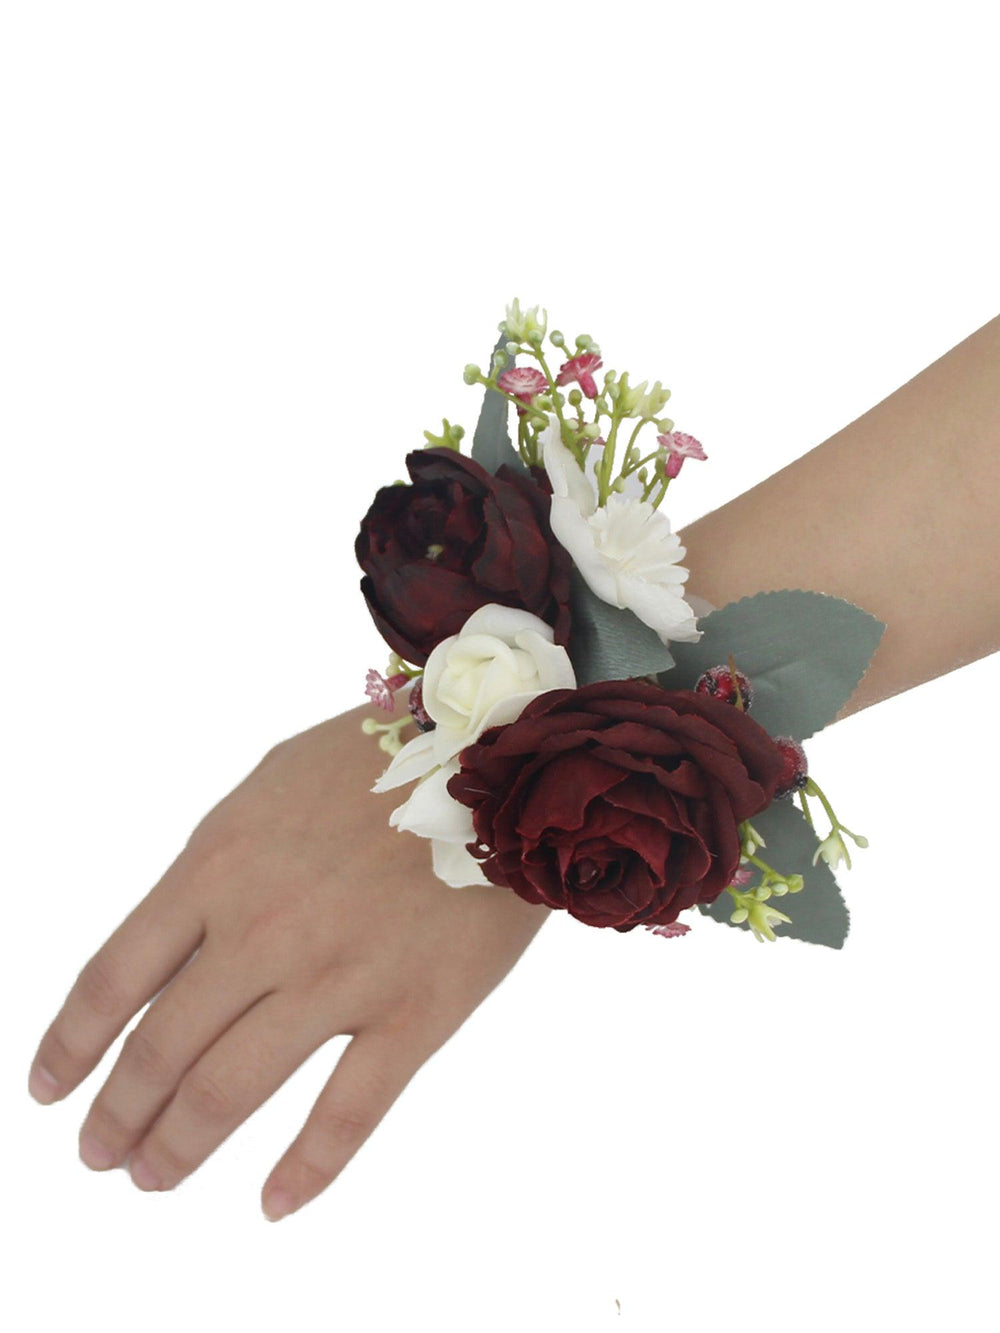 Baywell Wrist Corsages for Wedding (Set of 4), Blush & Pink Corsages with  Ribbon for Wedding Mother of Bride and Groom, Prom Flowers 